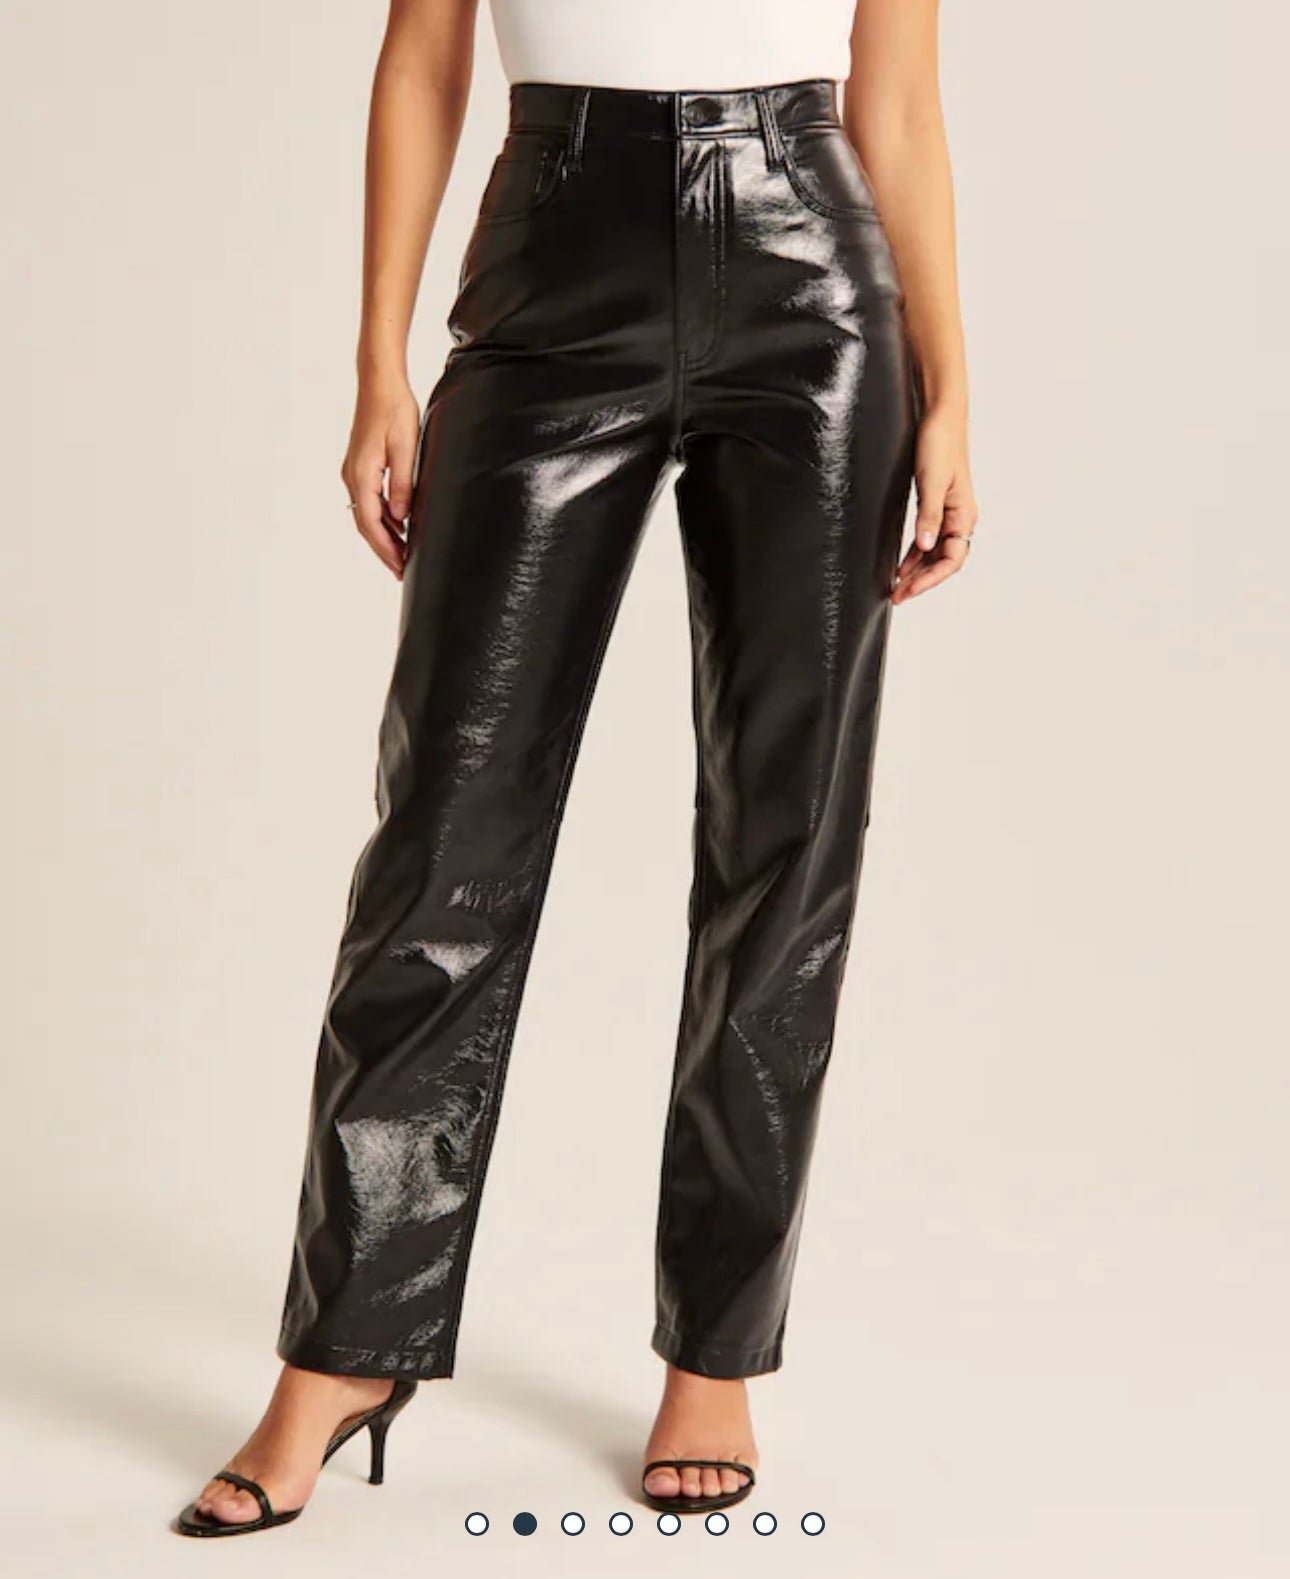 Fashion Abercrombie and Finch leather pants m8KGQMRa7 j